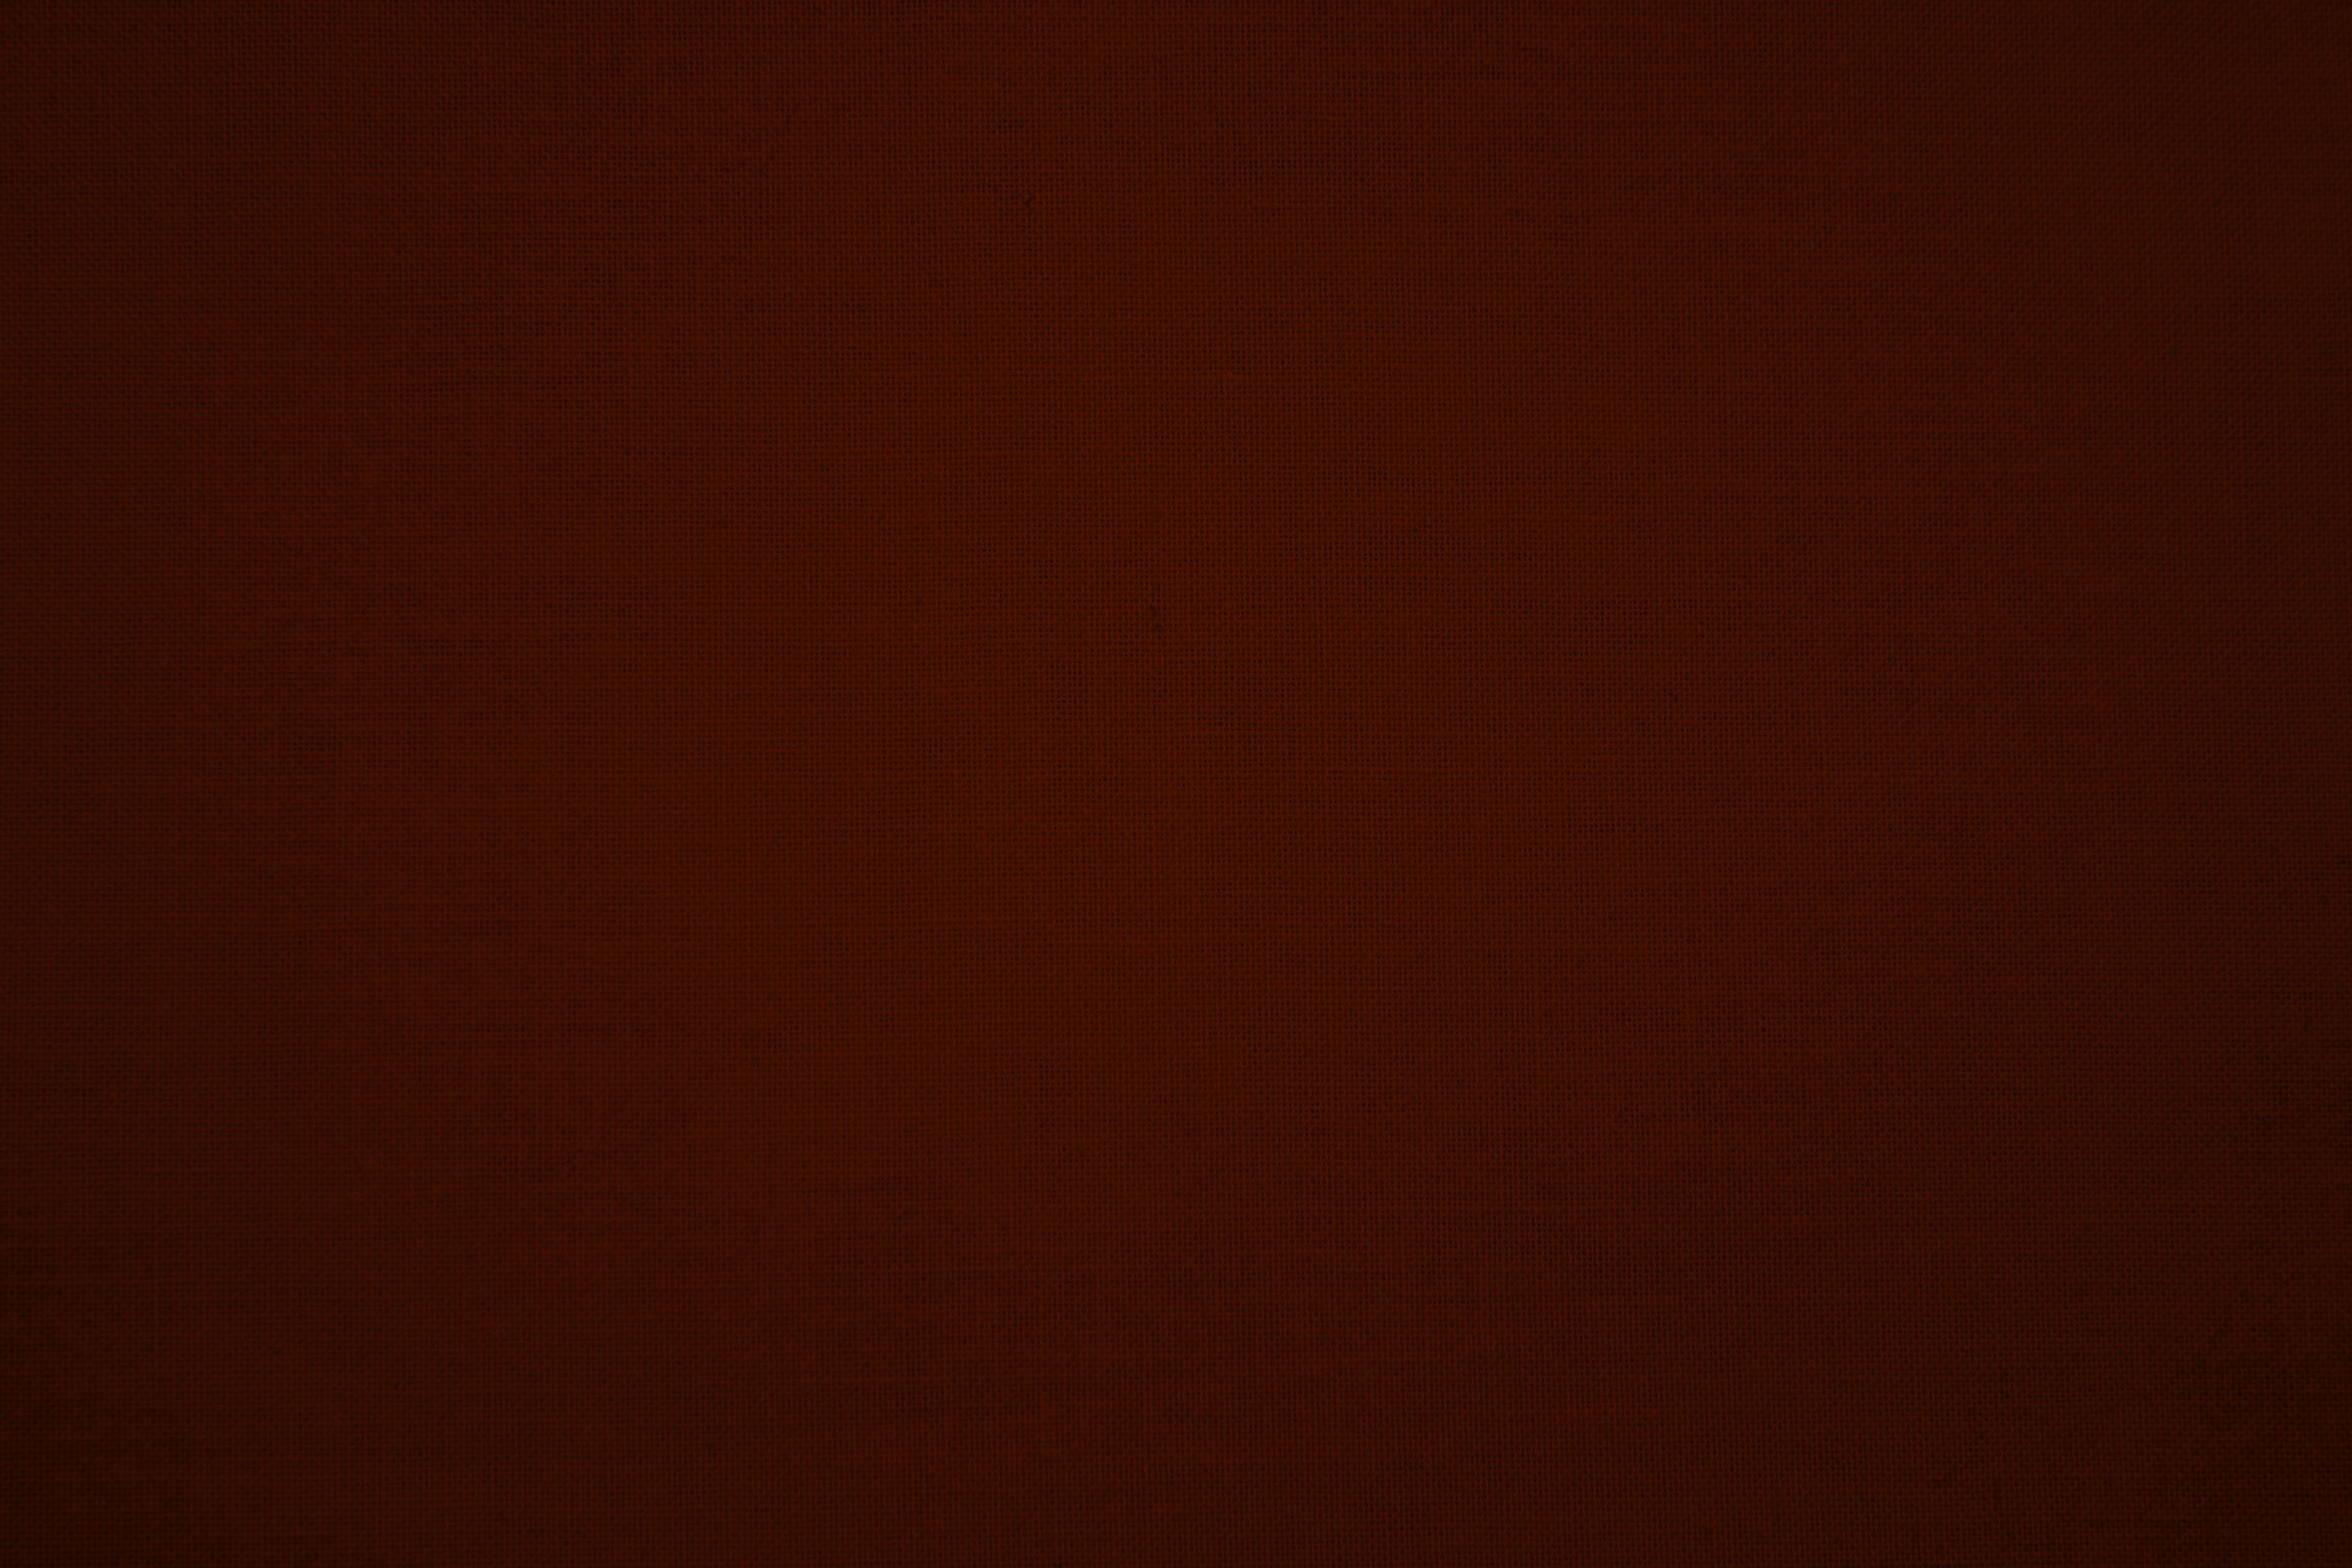 Dark Red Canvas Fabric Texture Picture | Free Photograph | Photos ...